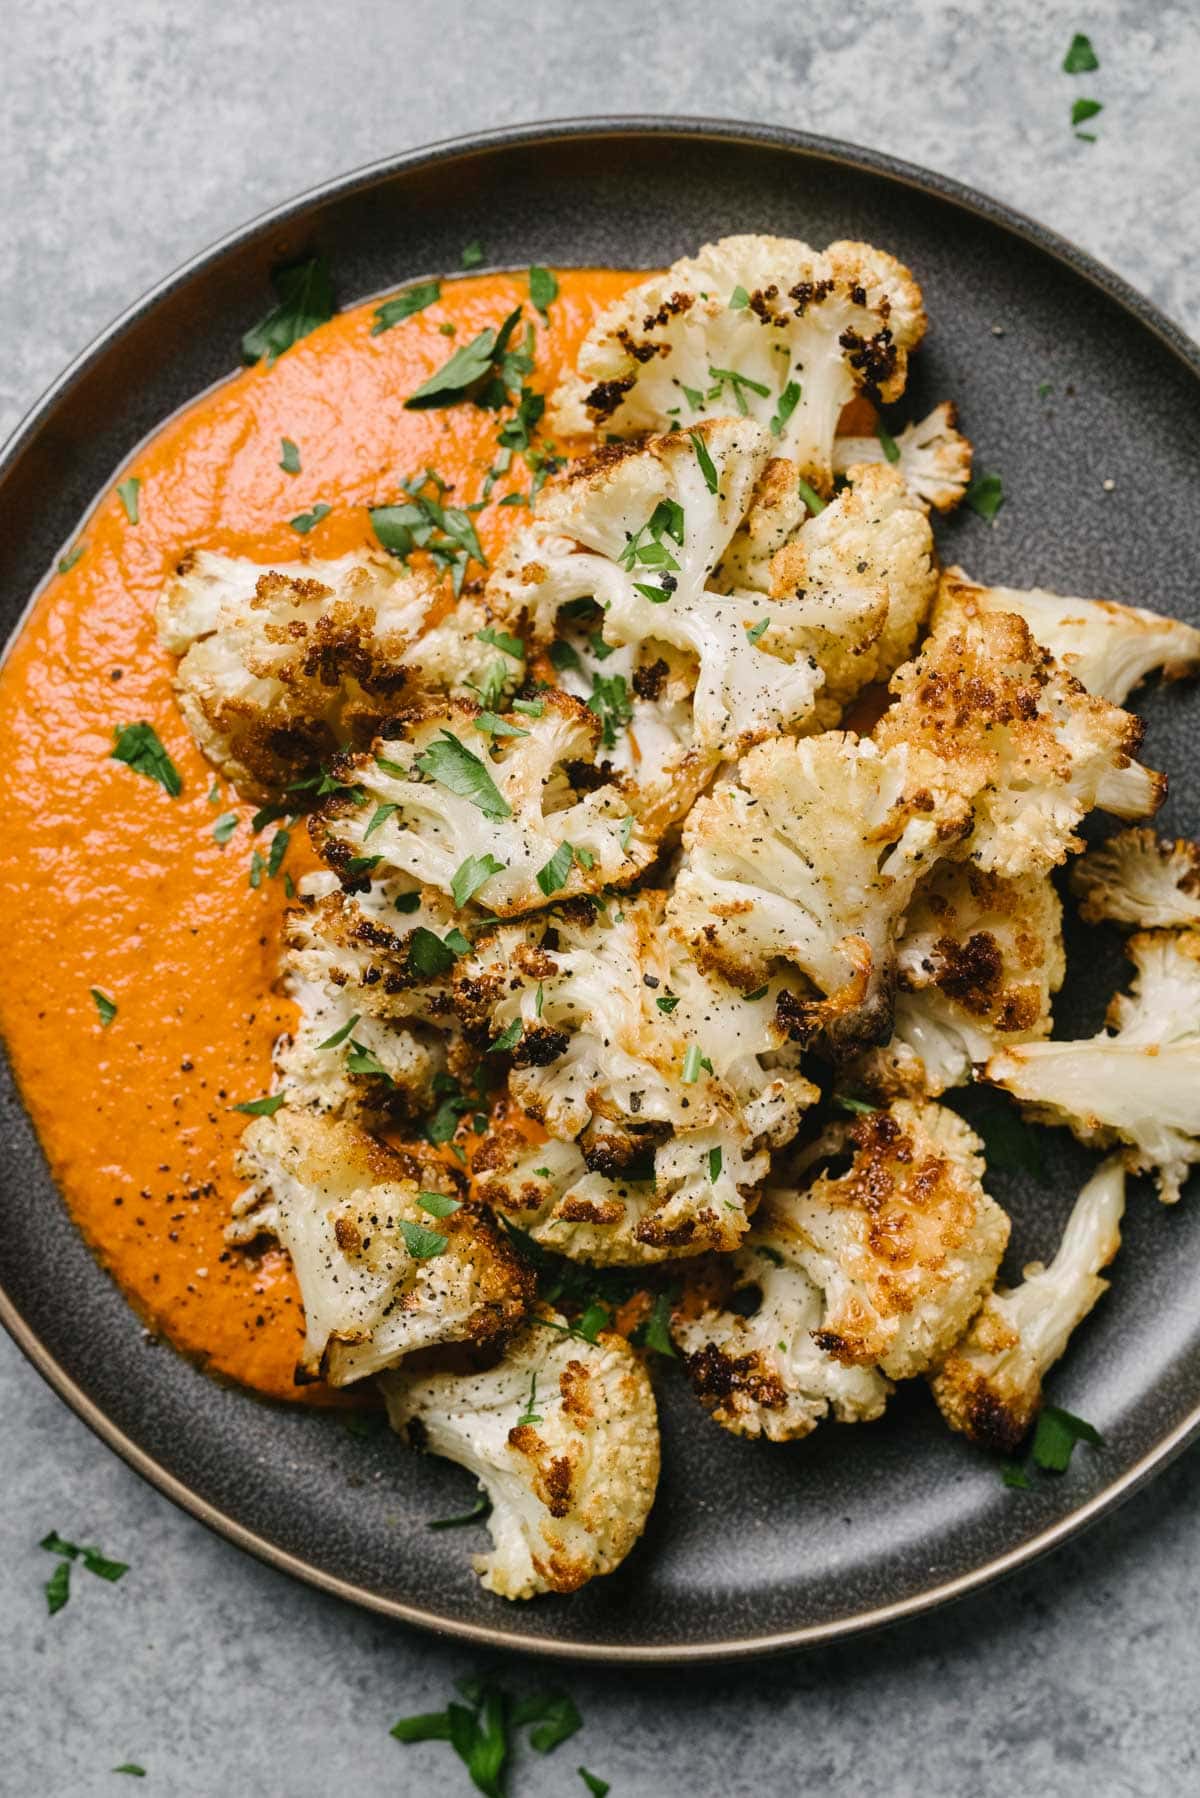 Roasted cauliflower florets with romesco sauce on a dark grey plate, garnished with fresh chopped parsley.